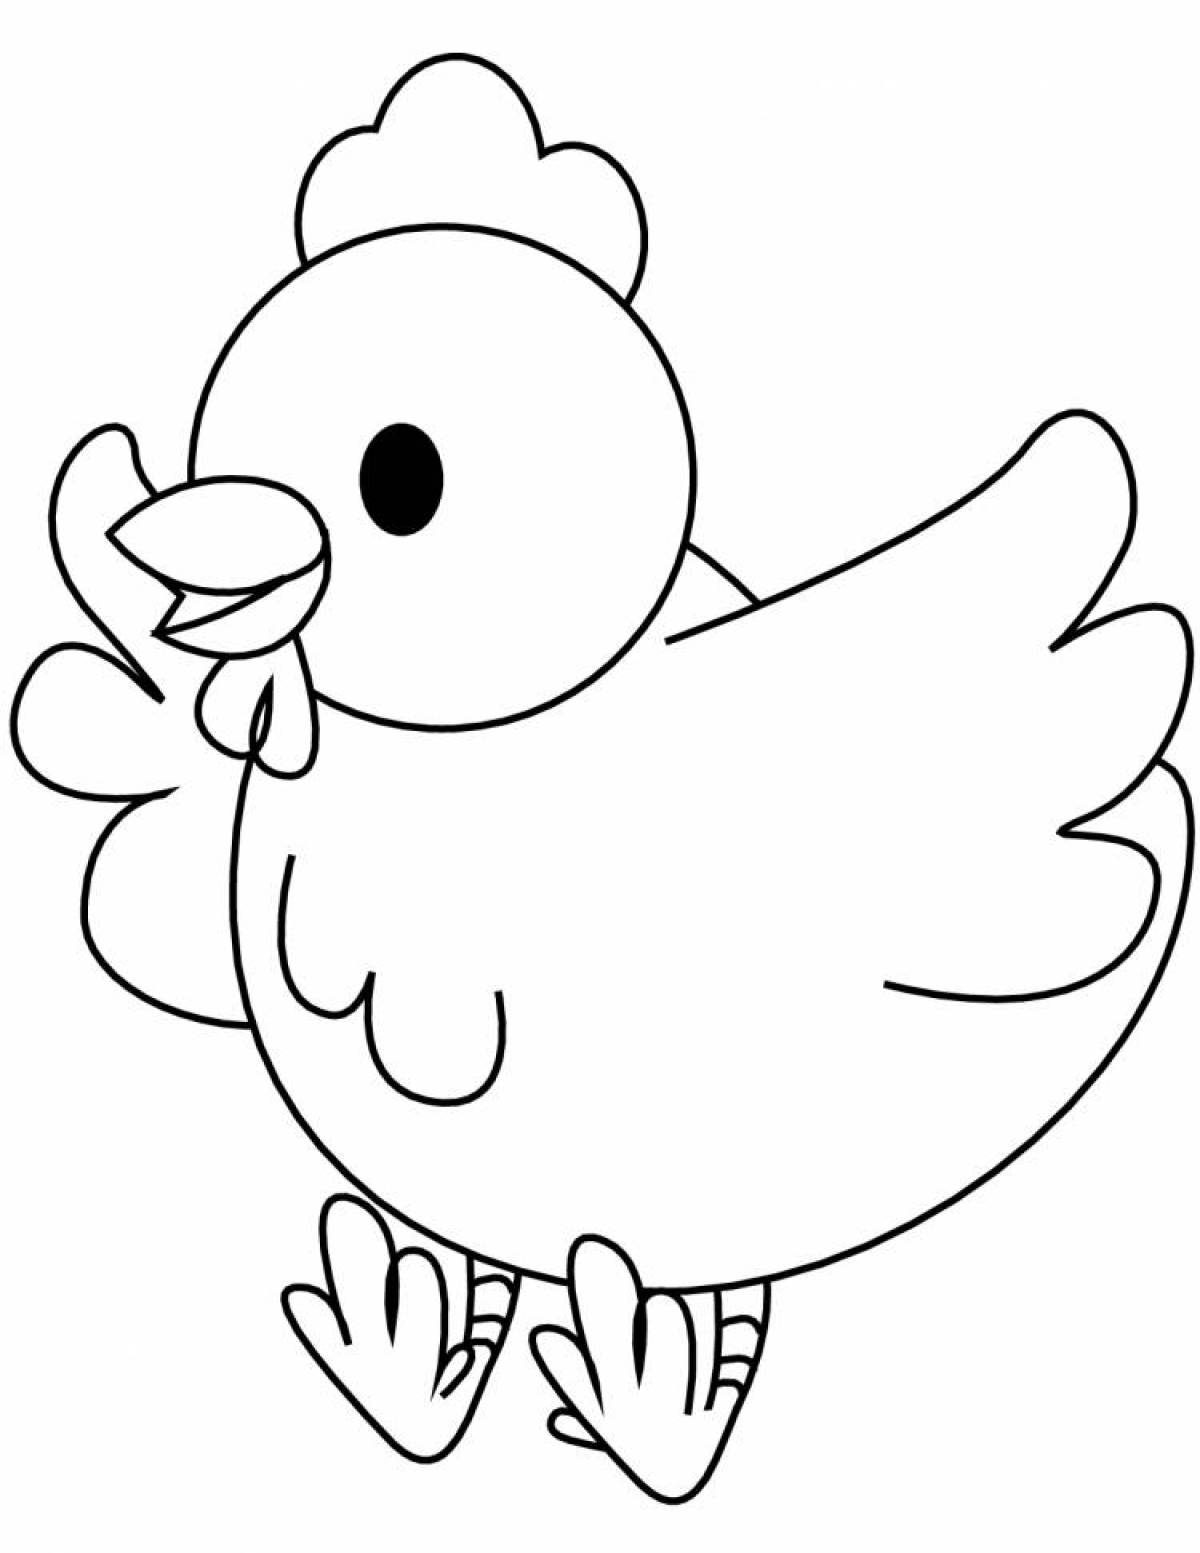 Strange chicken coloring book for kids 2-3 years old